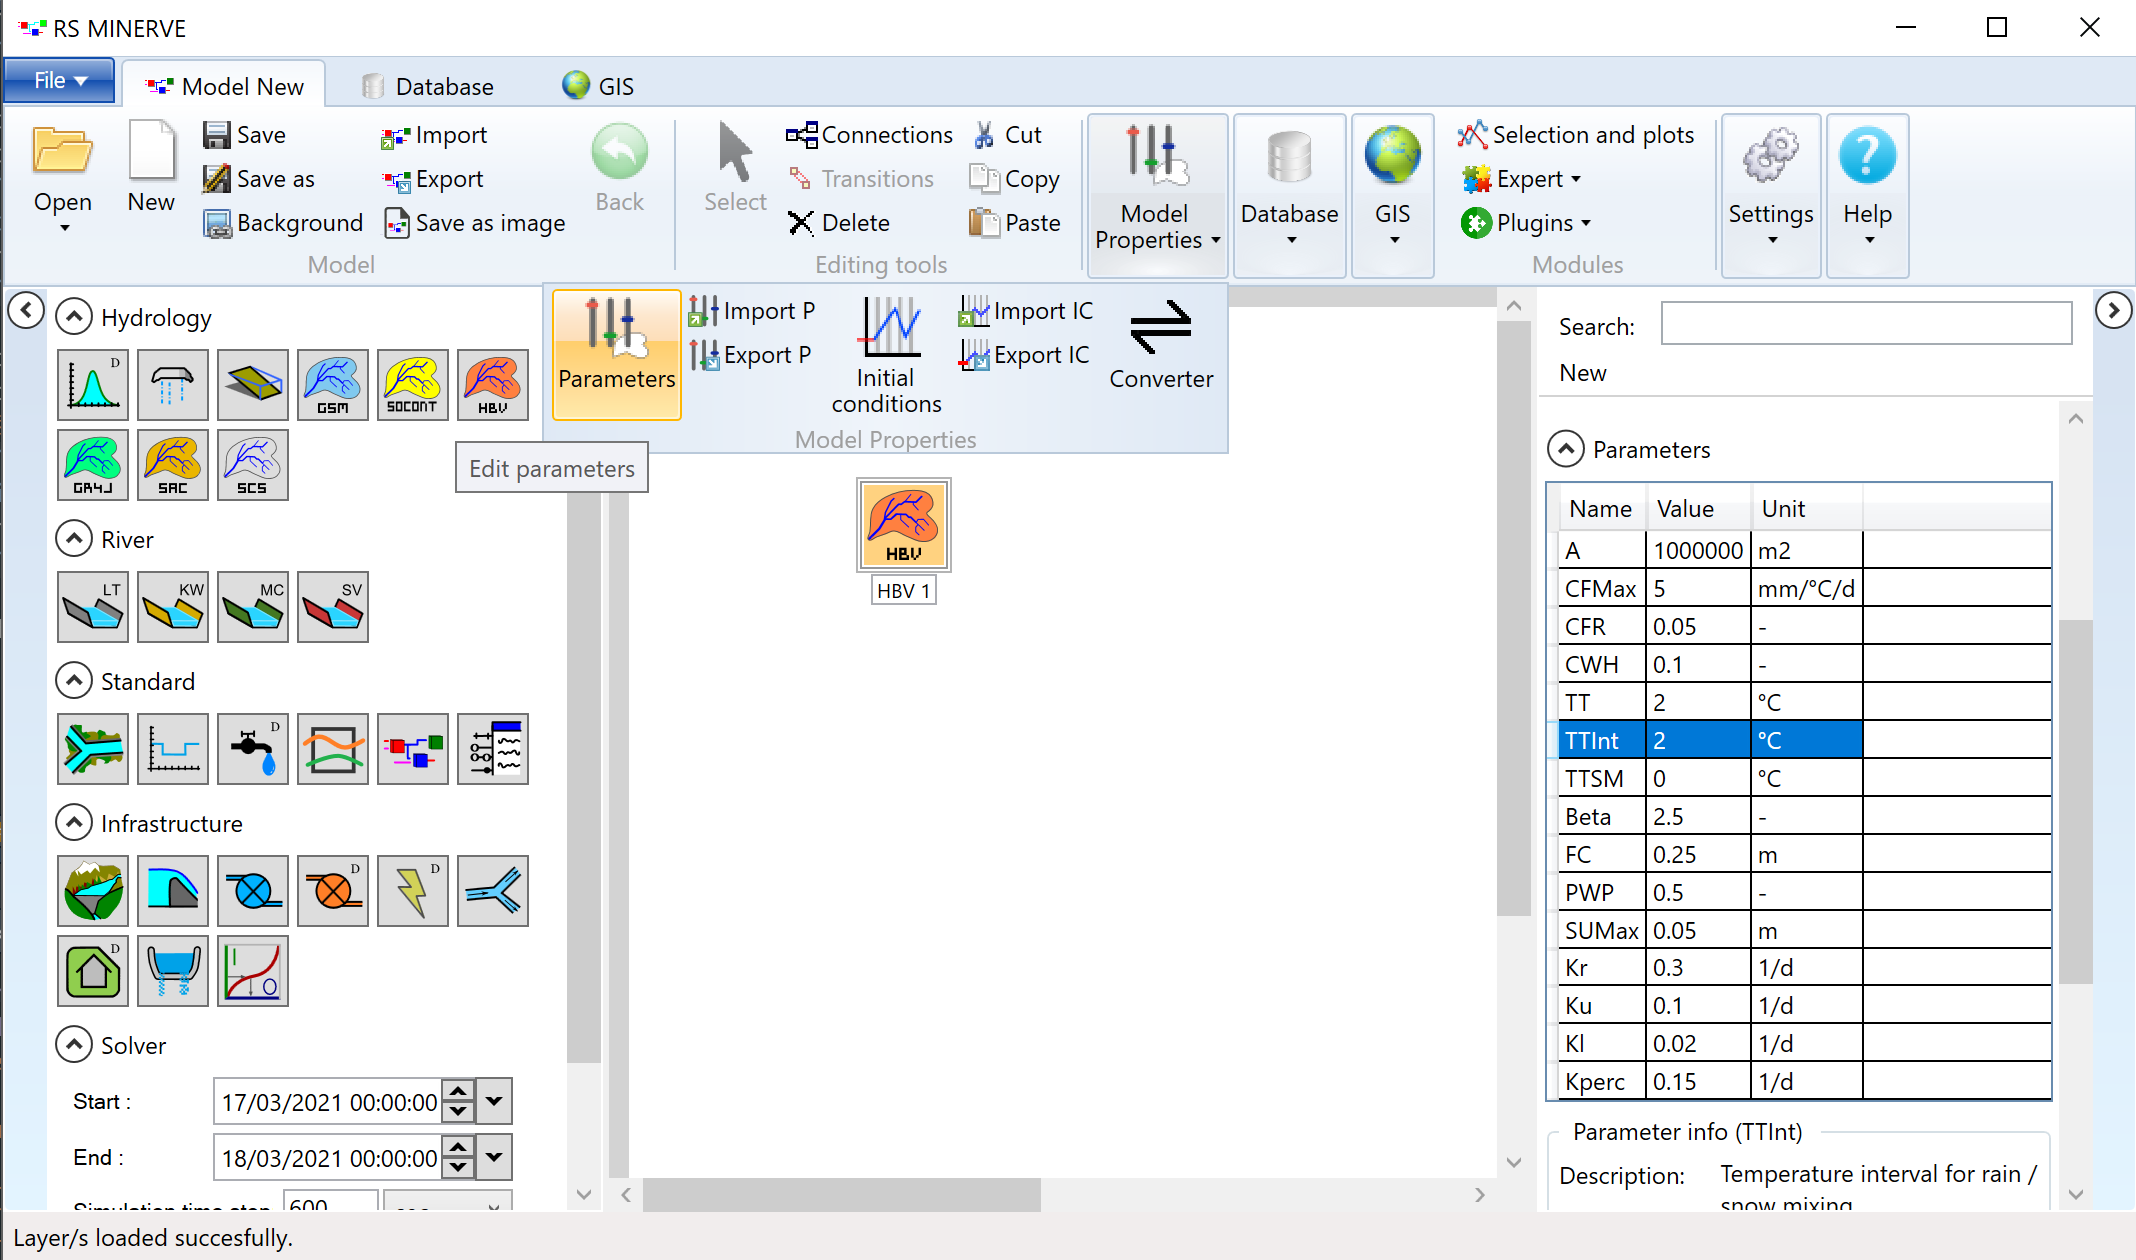 Activate the Parameters panel in the Model Properties toolbar. 